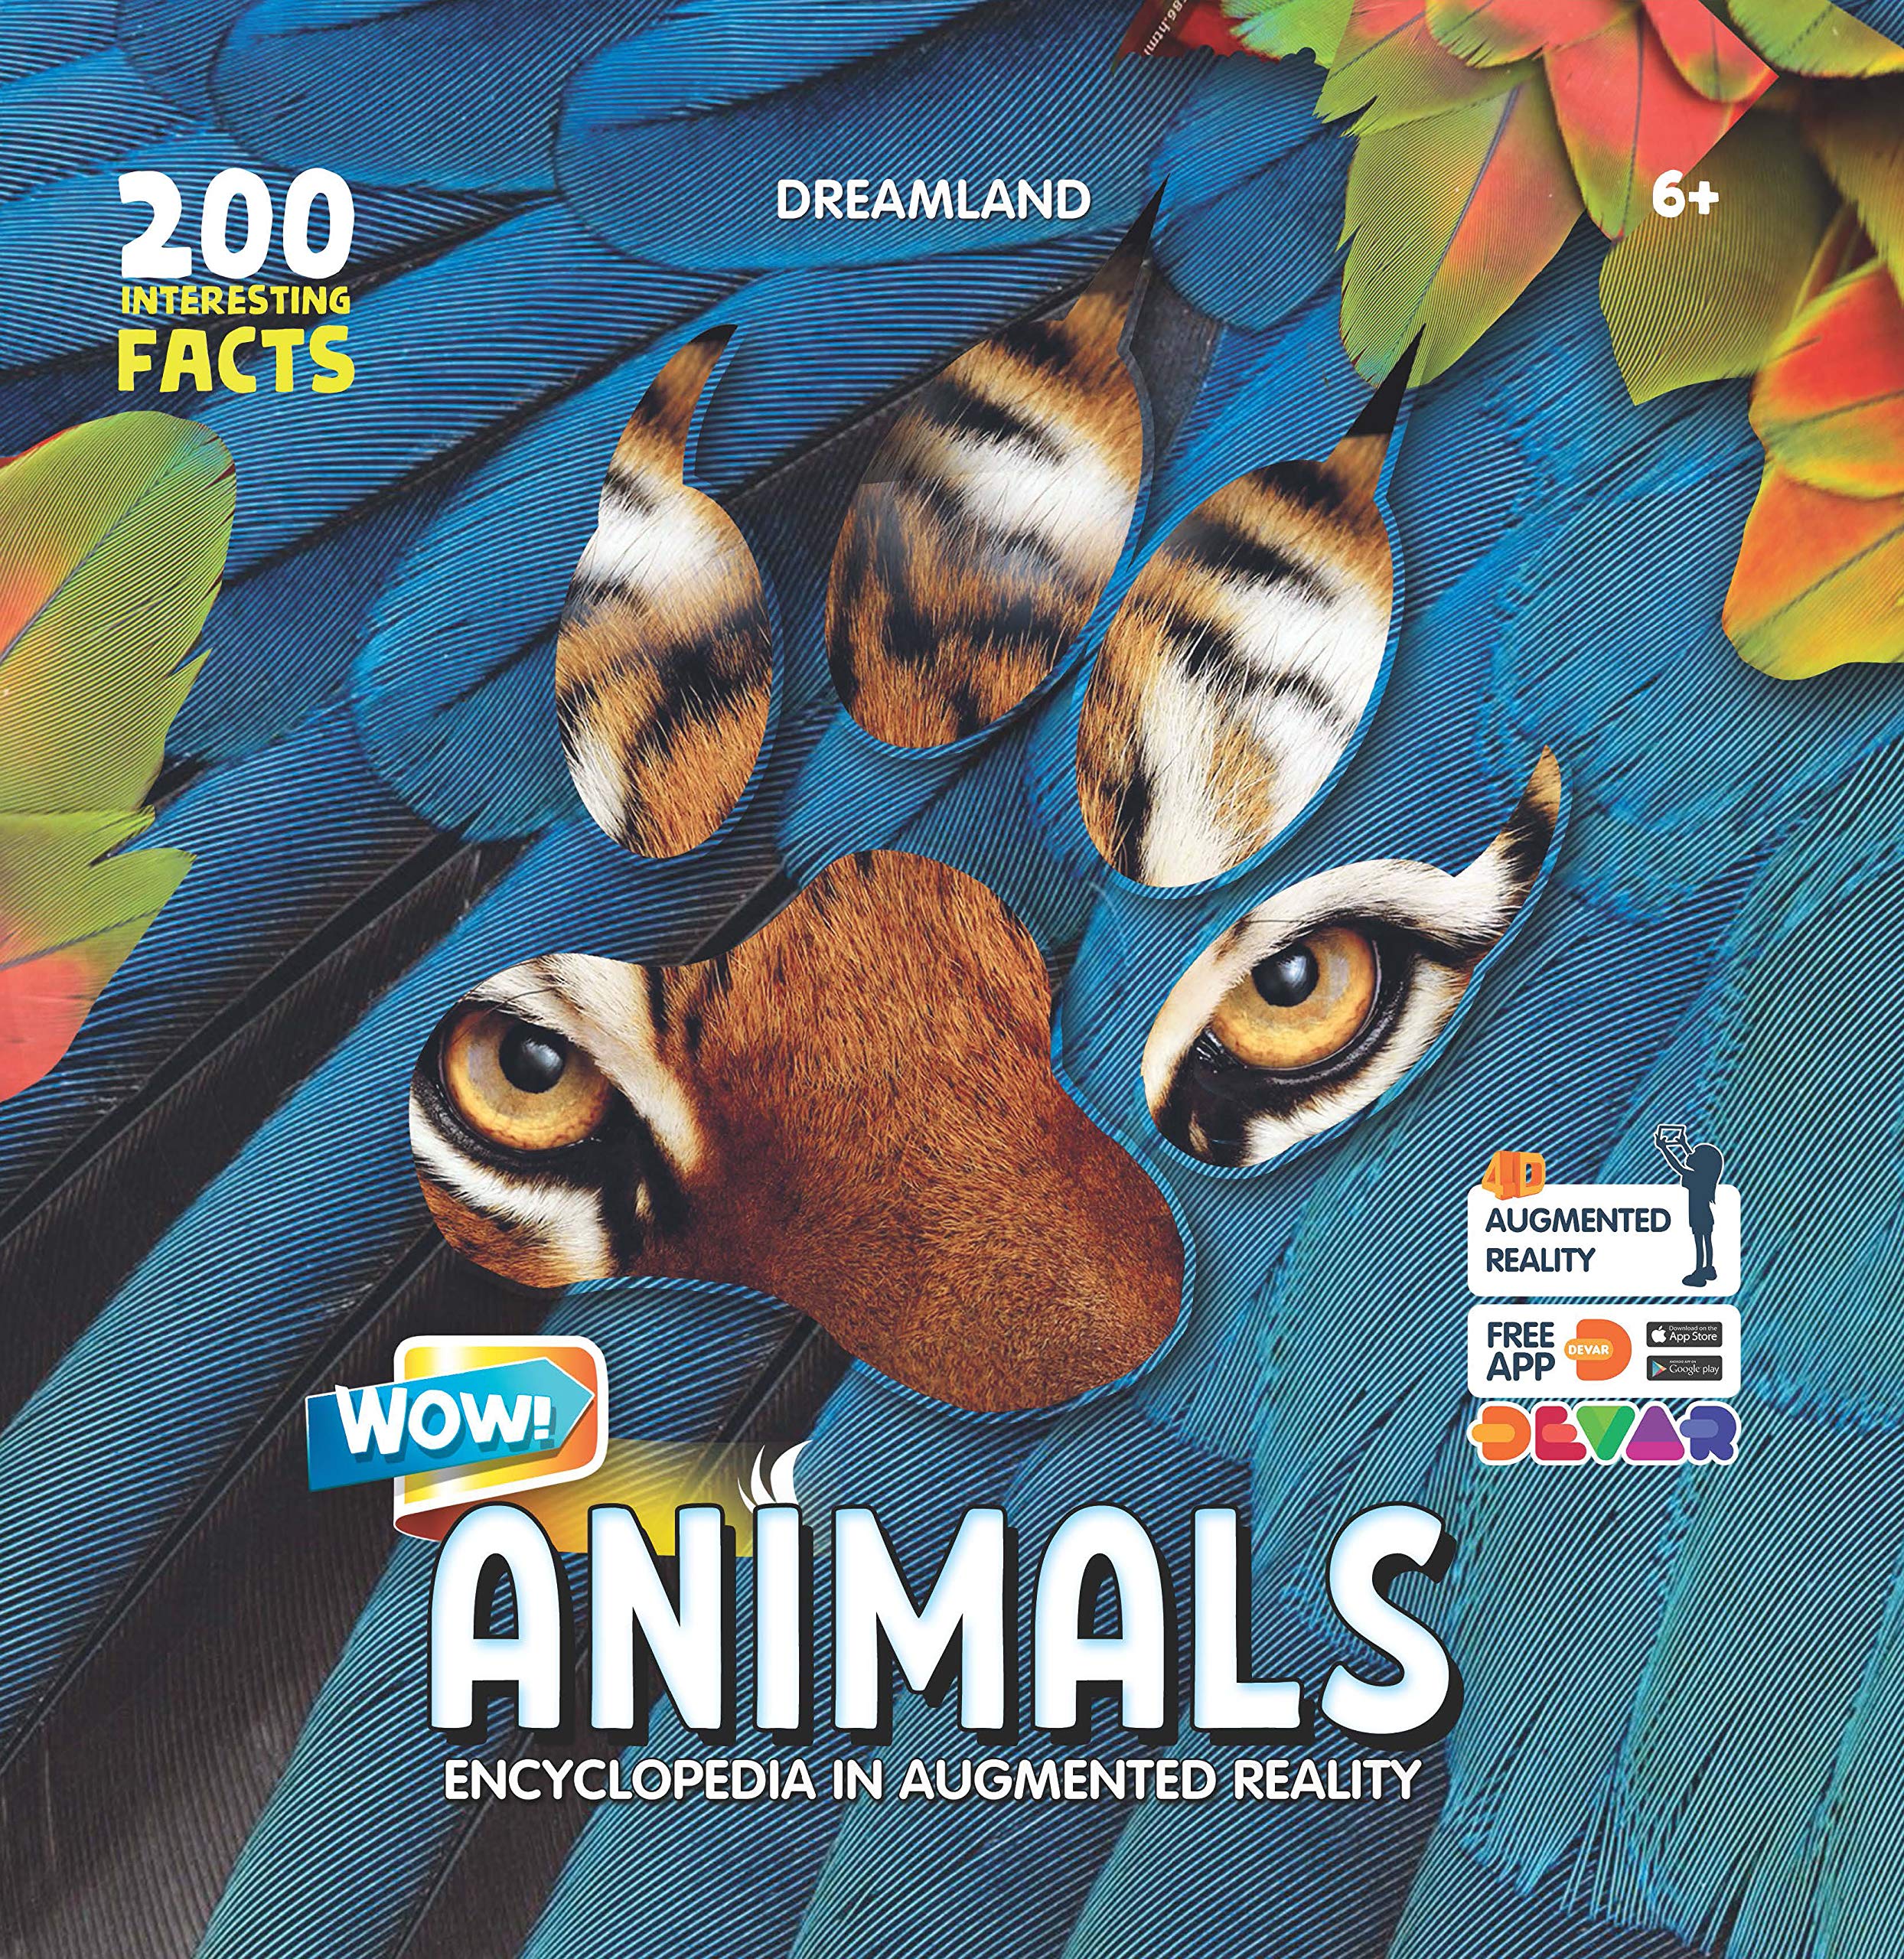 Animals WOW Children Encyclopedia in Augmented Reality & Free AR App with 200 Interesting Facts|